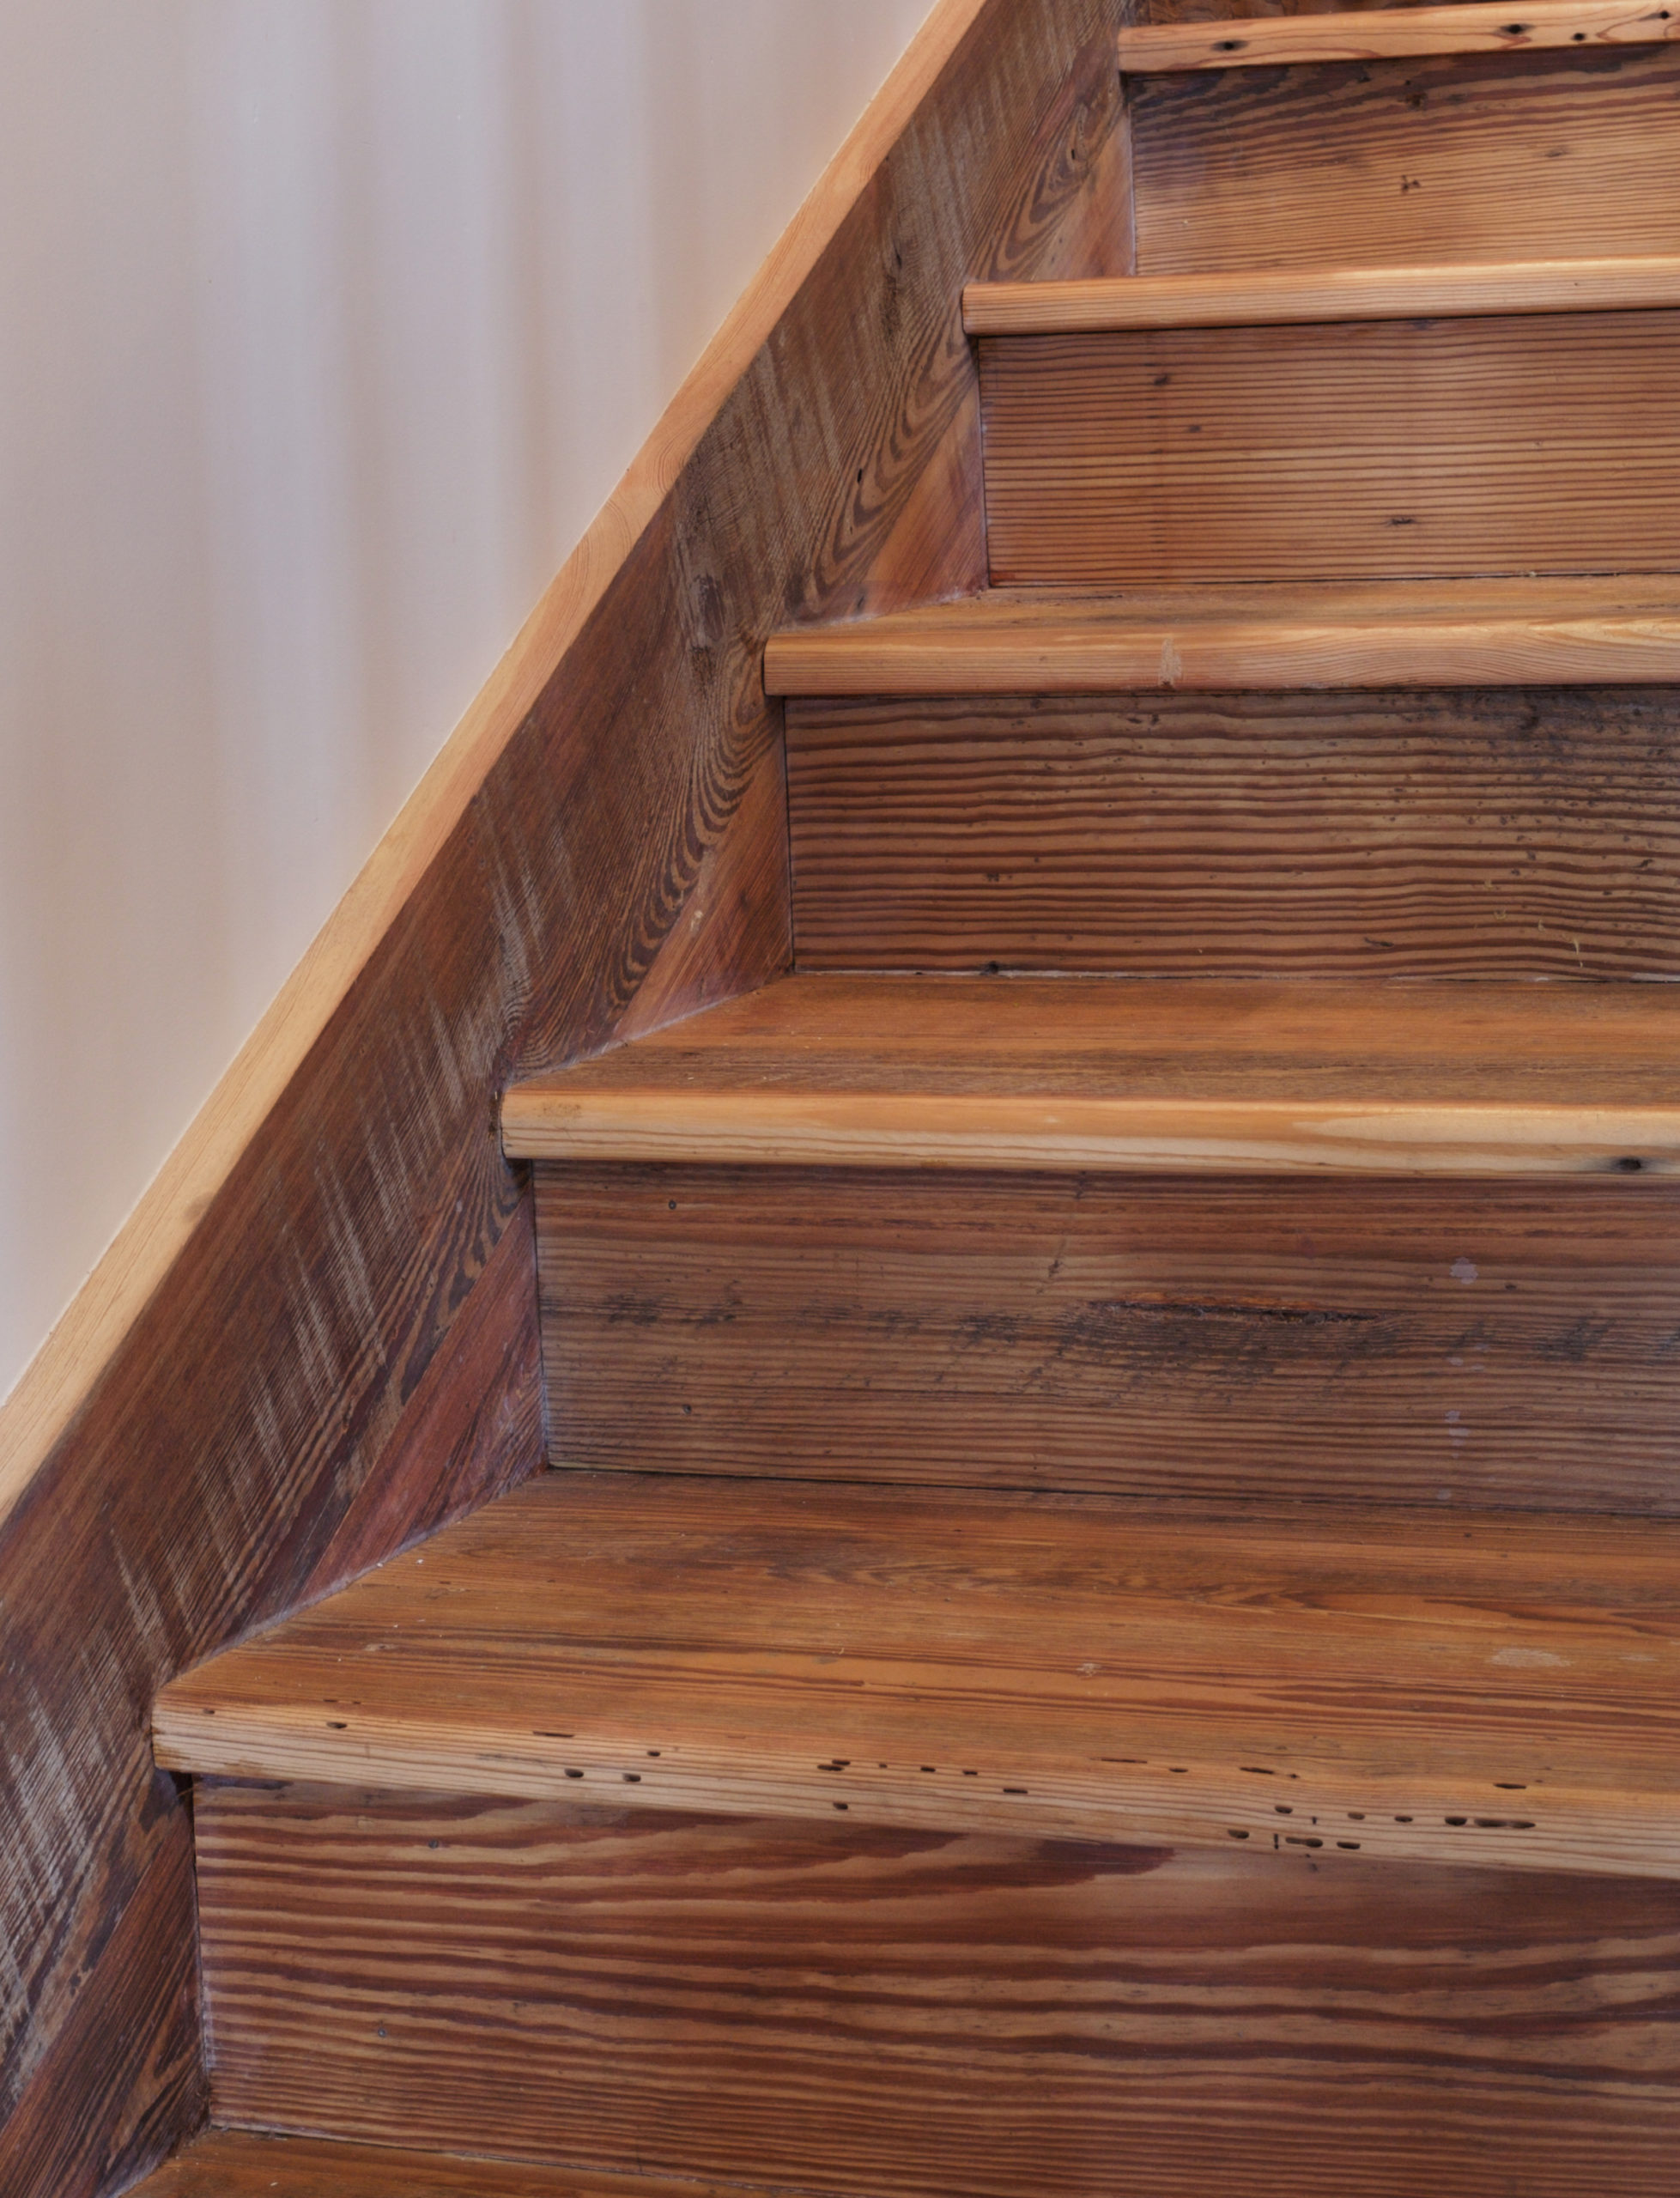 Stair Parts & Stair Treads